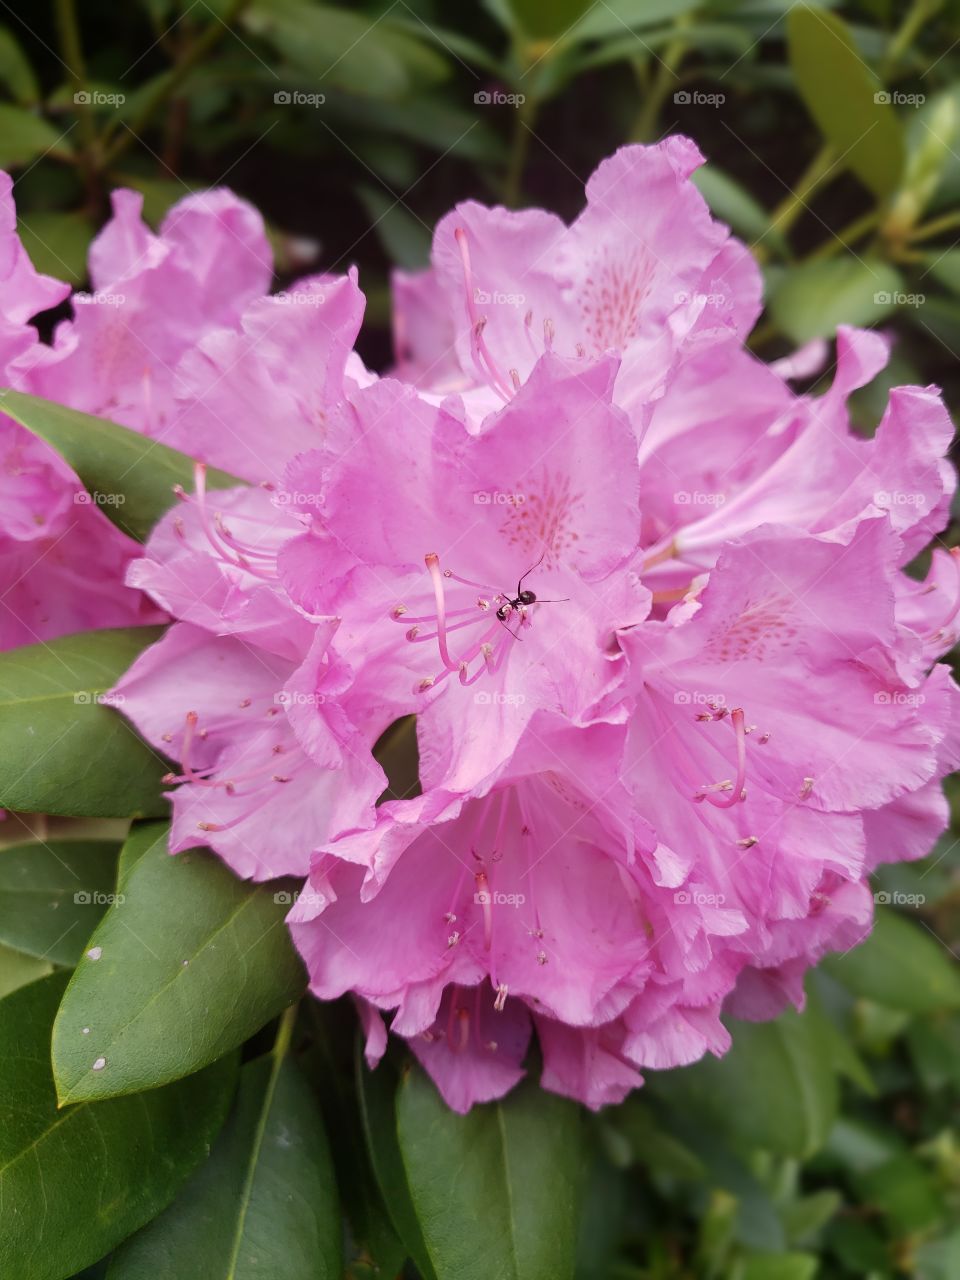 Ant on rhododendron